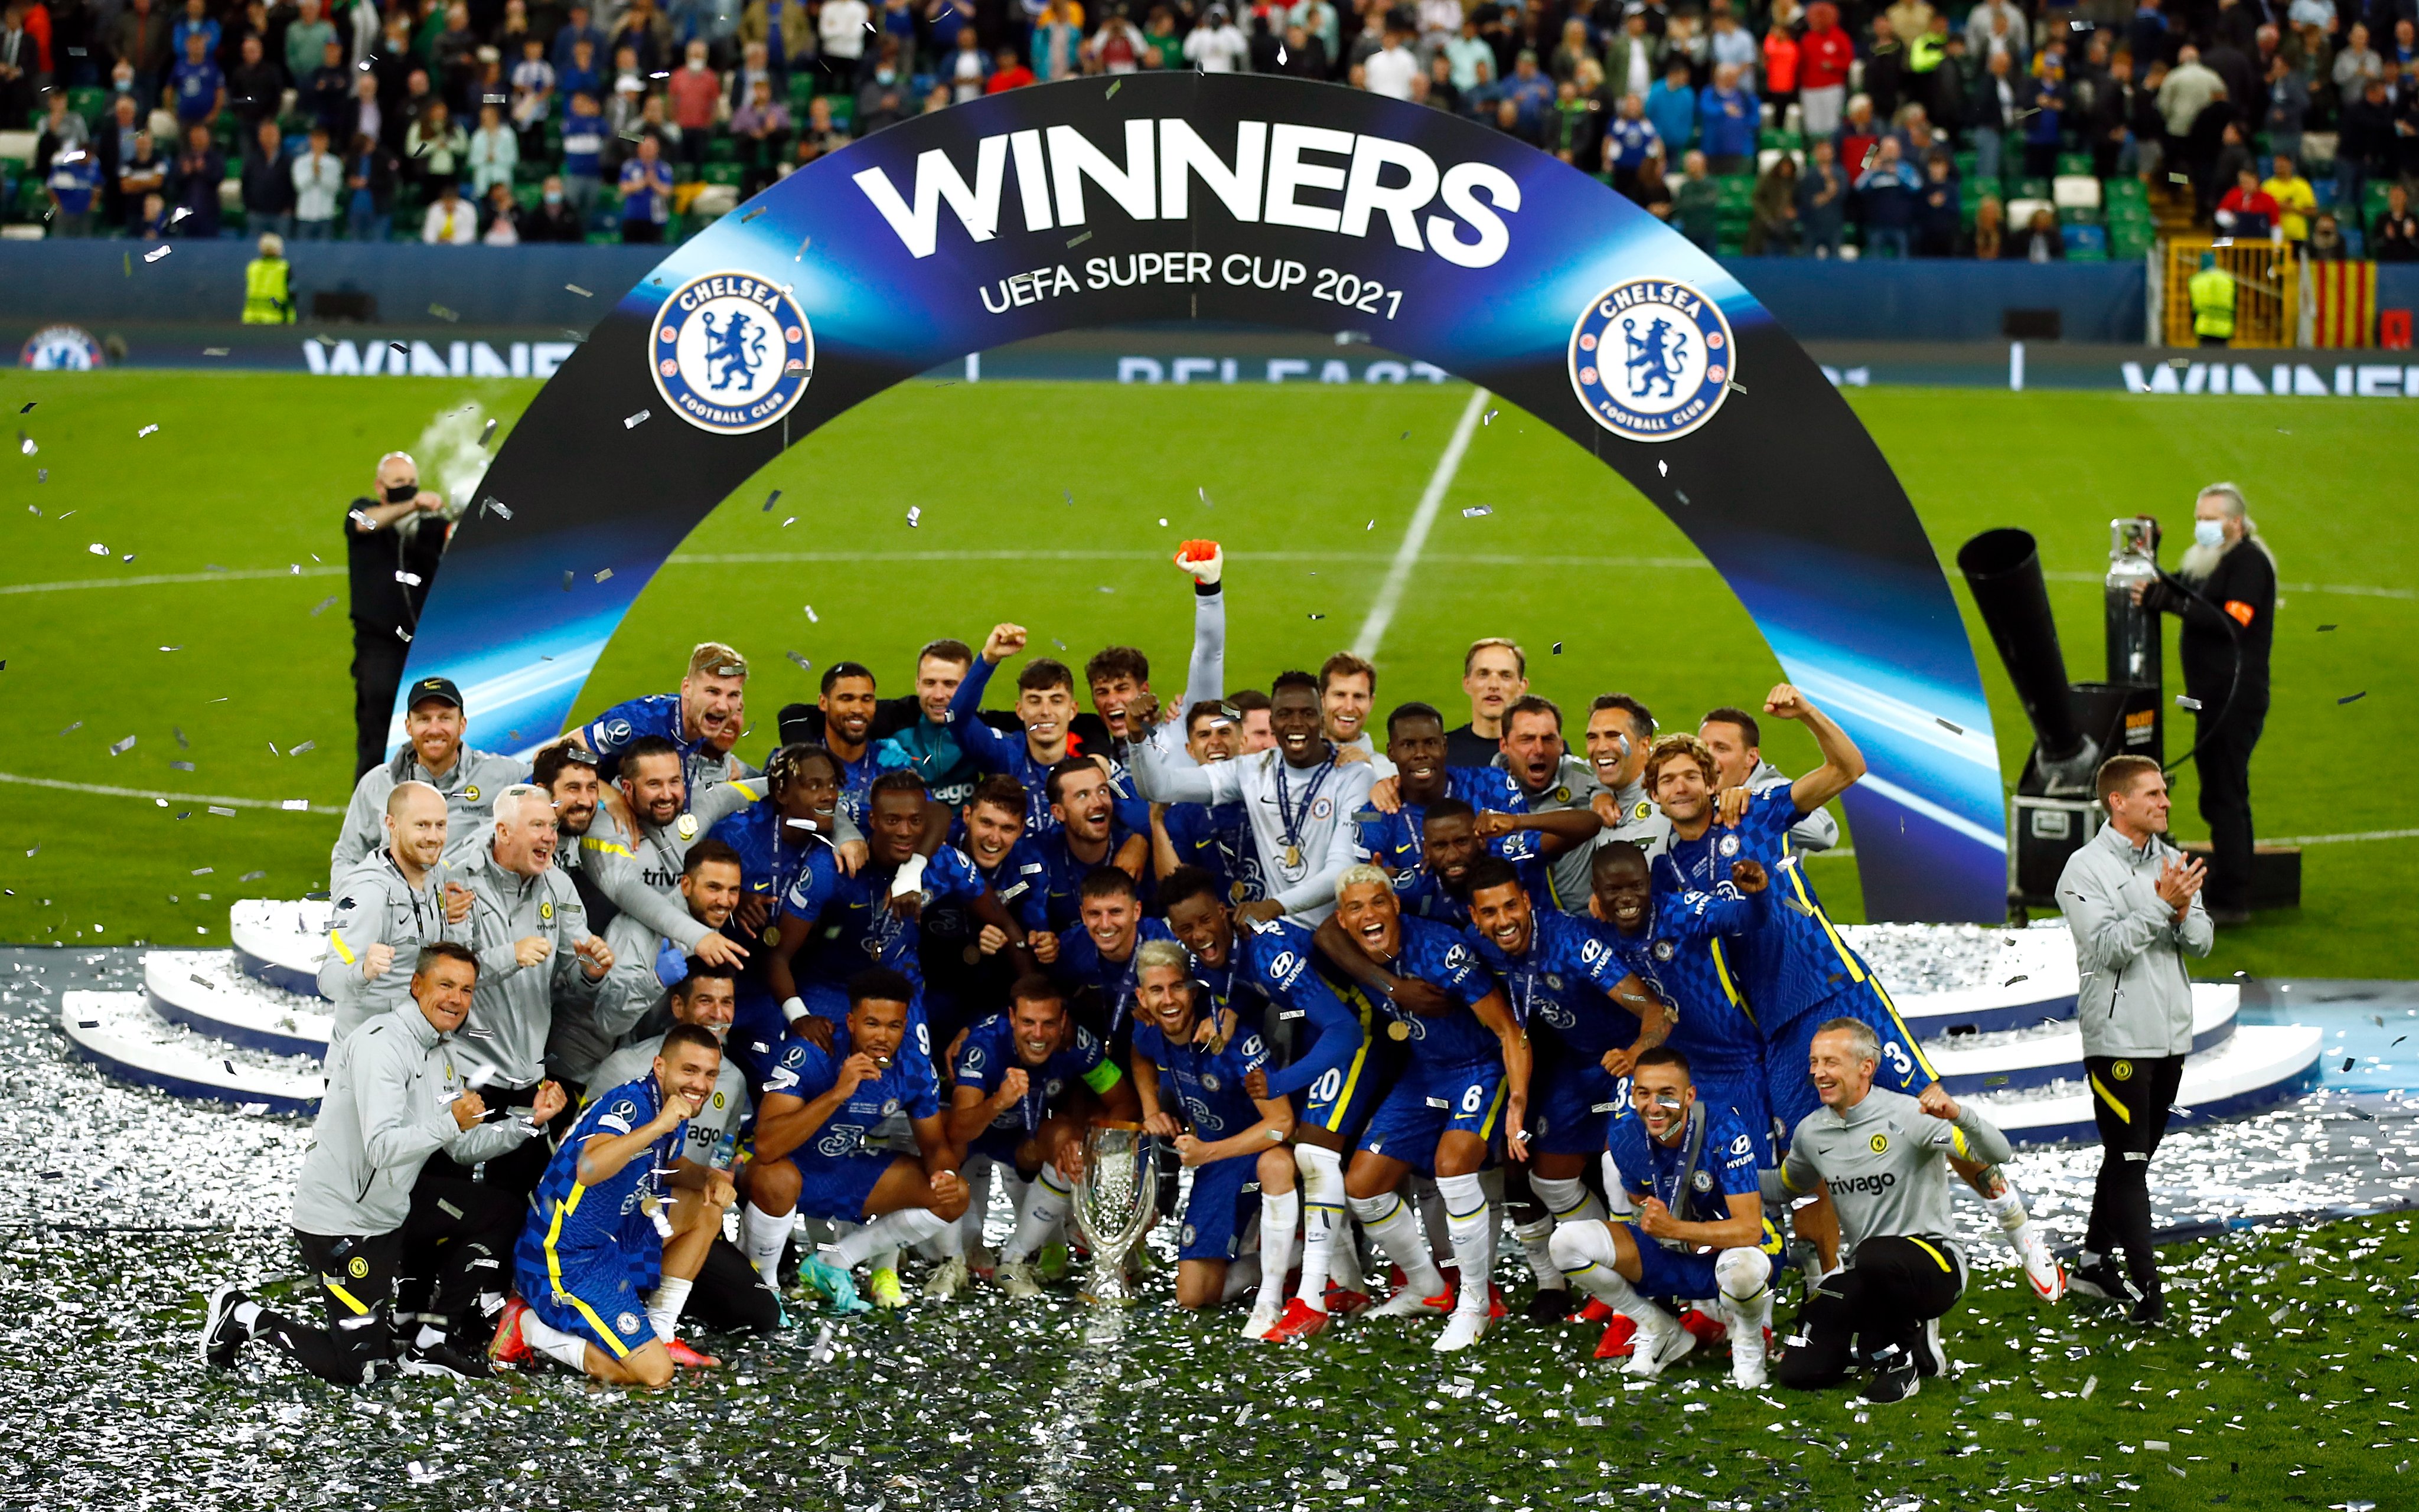 International Champions Cup Chelsea Since May 15 21 Fa Cup Final Champions League Winners Uefa Super Cup Winners What A Run T Co Ndaats9sry Twitter